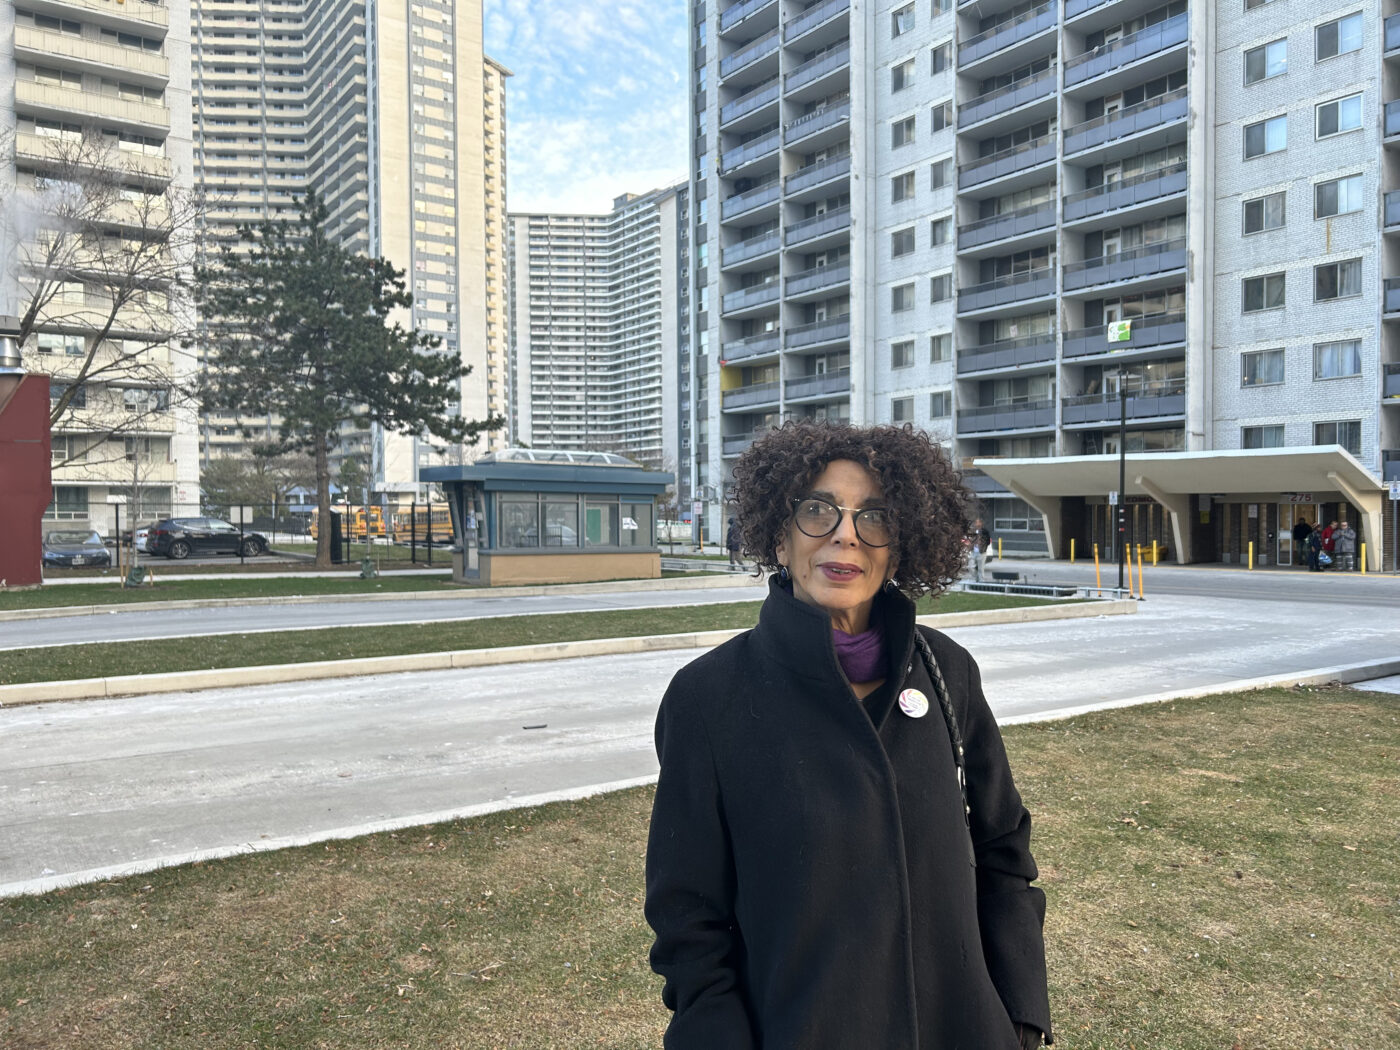 Josephine Grey, President and Co-founder of St. James Town Community Co-Operative, stands outside in the neighbourhood.